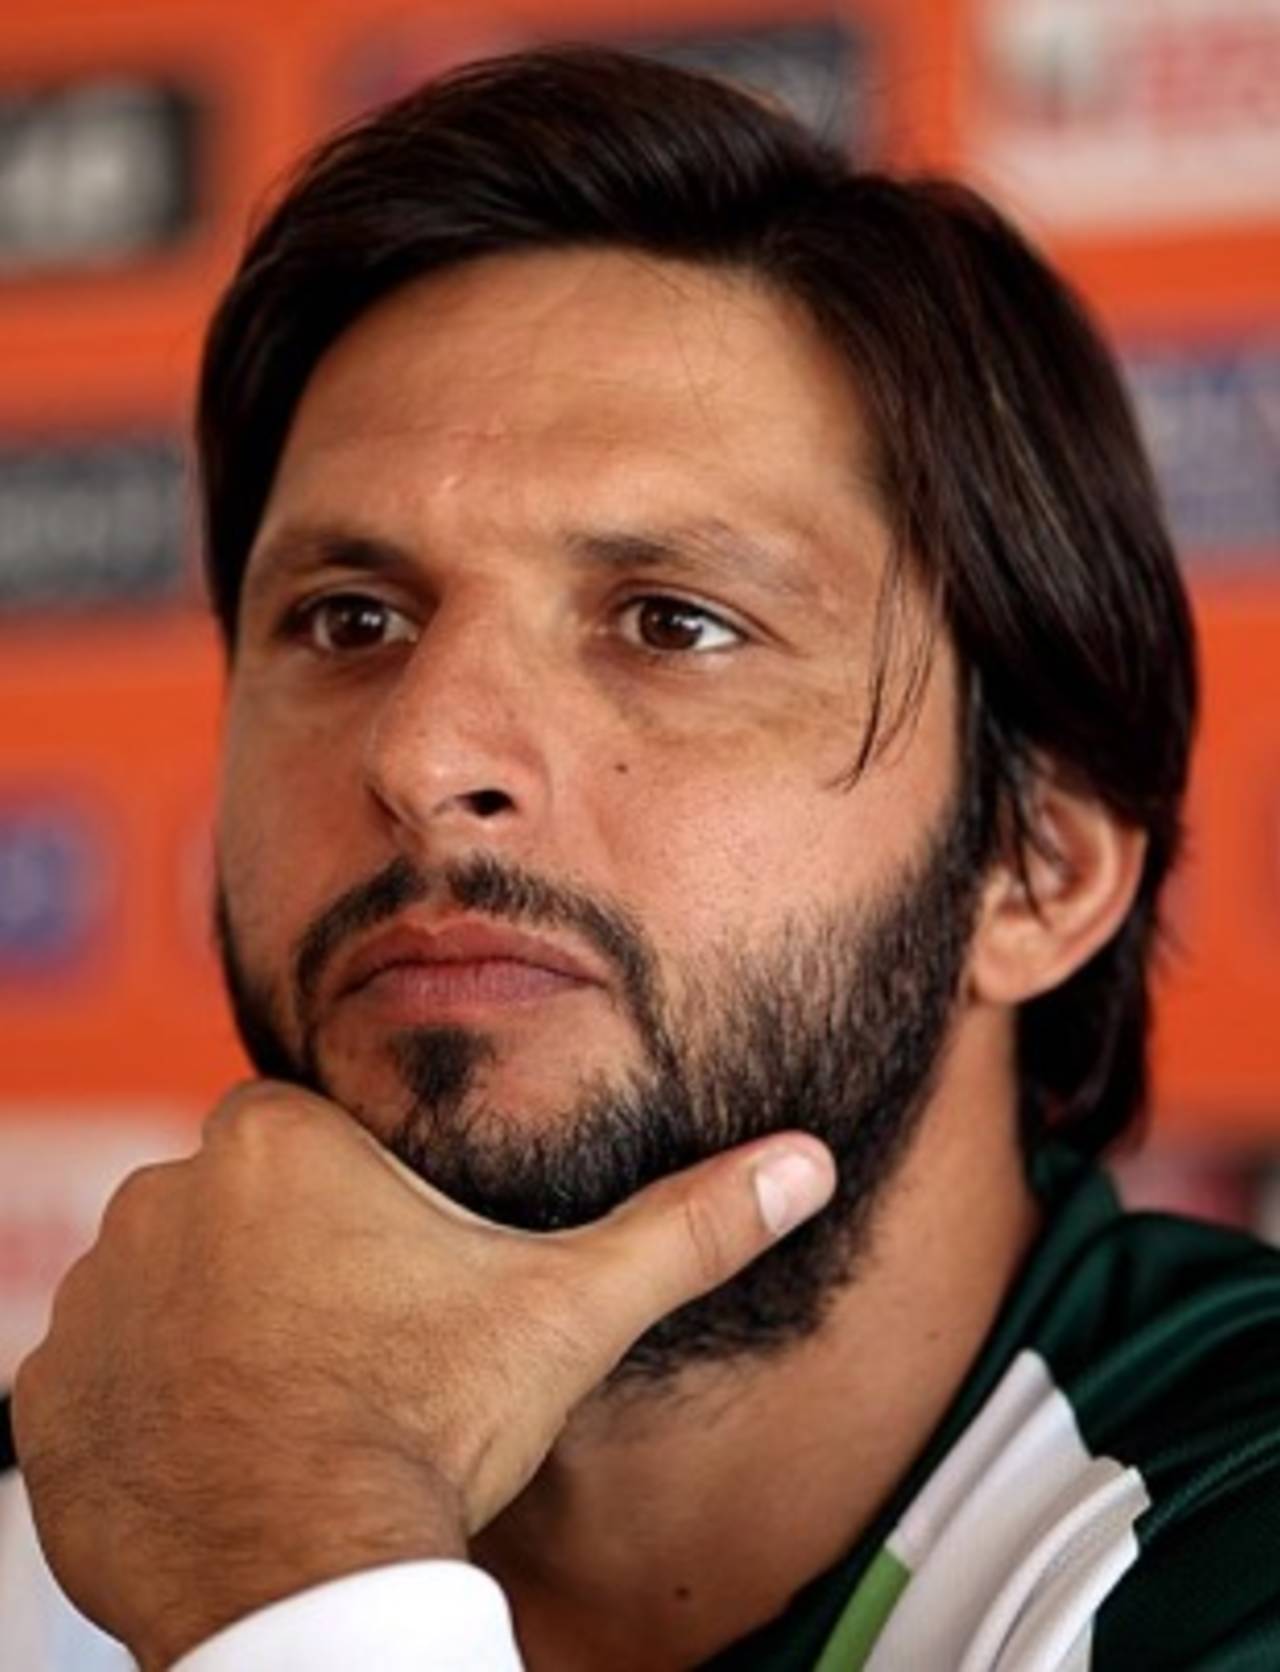 The general consensus seems to be that Afridi has let Pakistan cricket down&nbsp;&nbsp;&bull;&nbsp;&nbsp;Getty Images